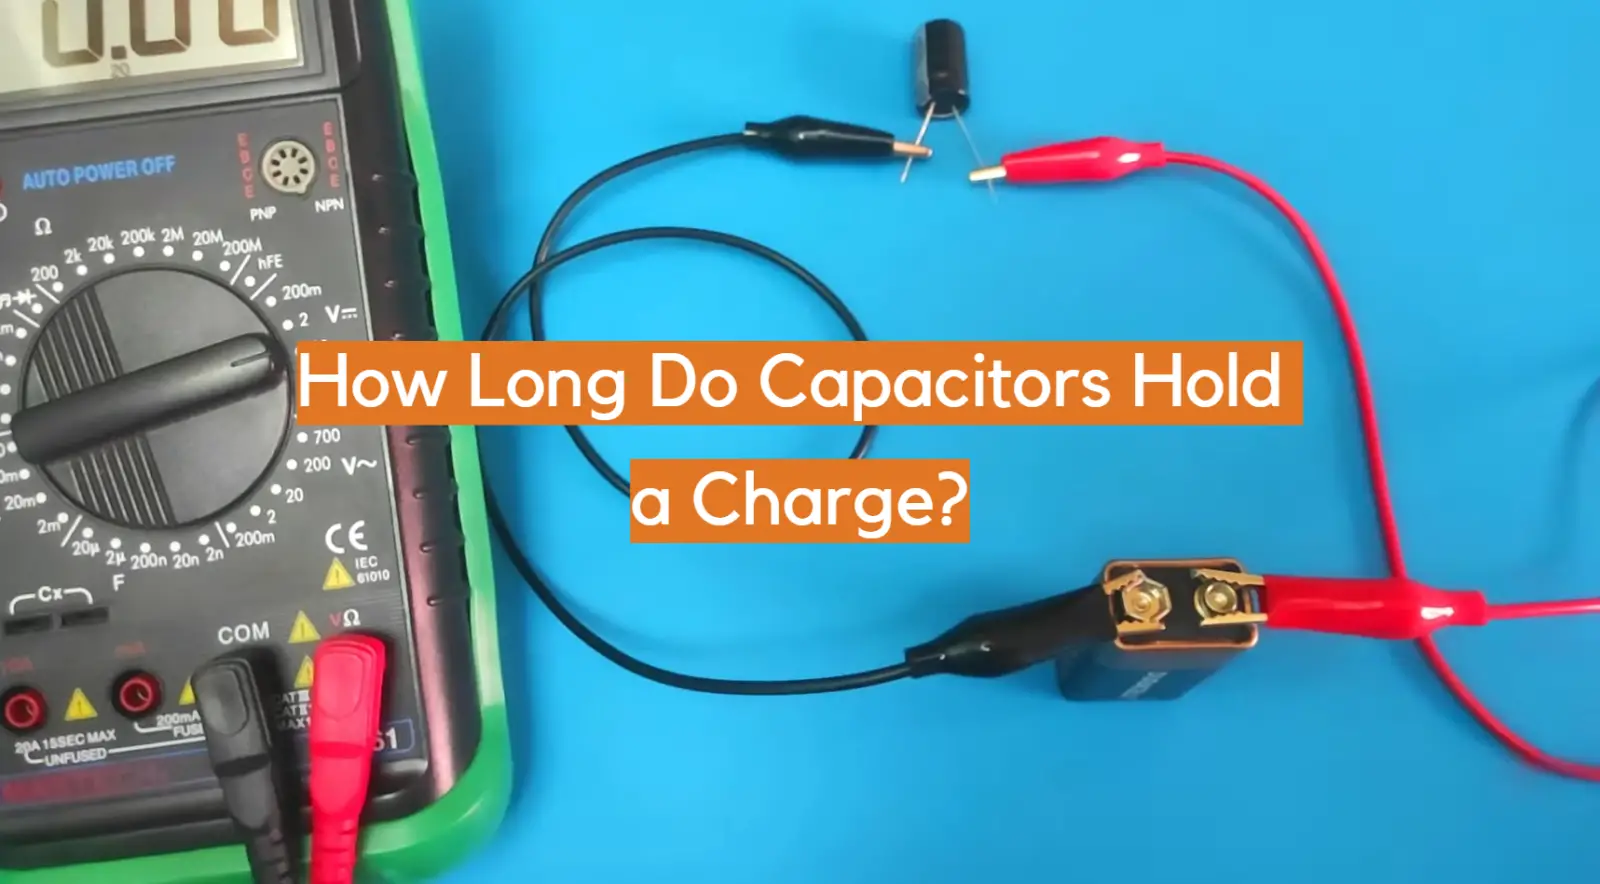 How Long Do Capacitors Hold a Charge?